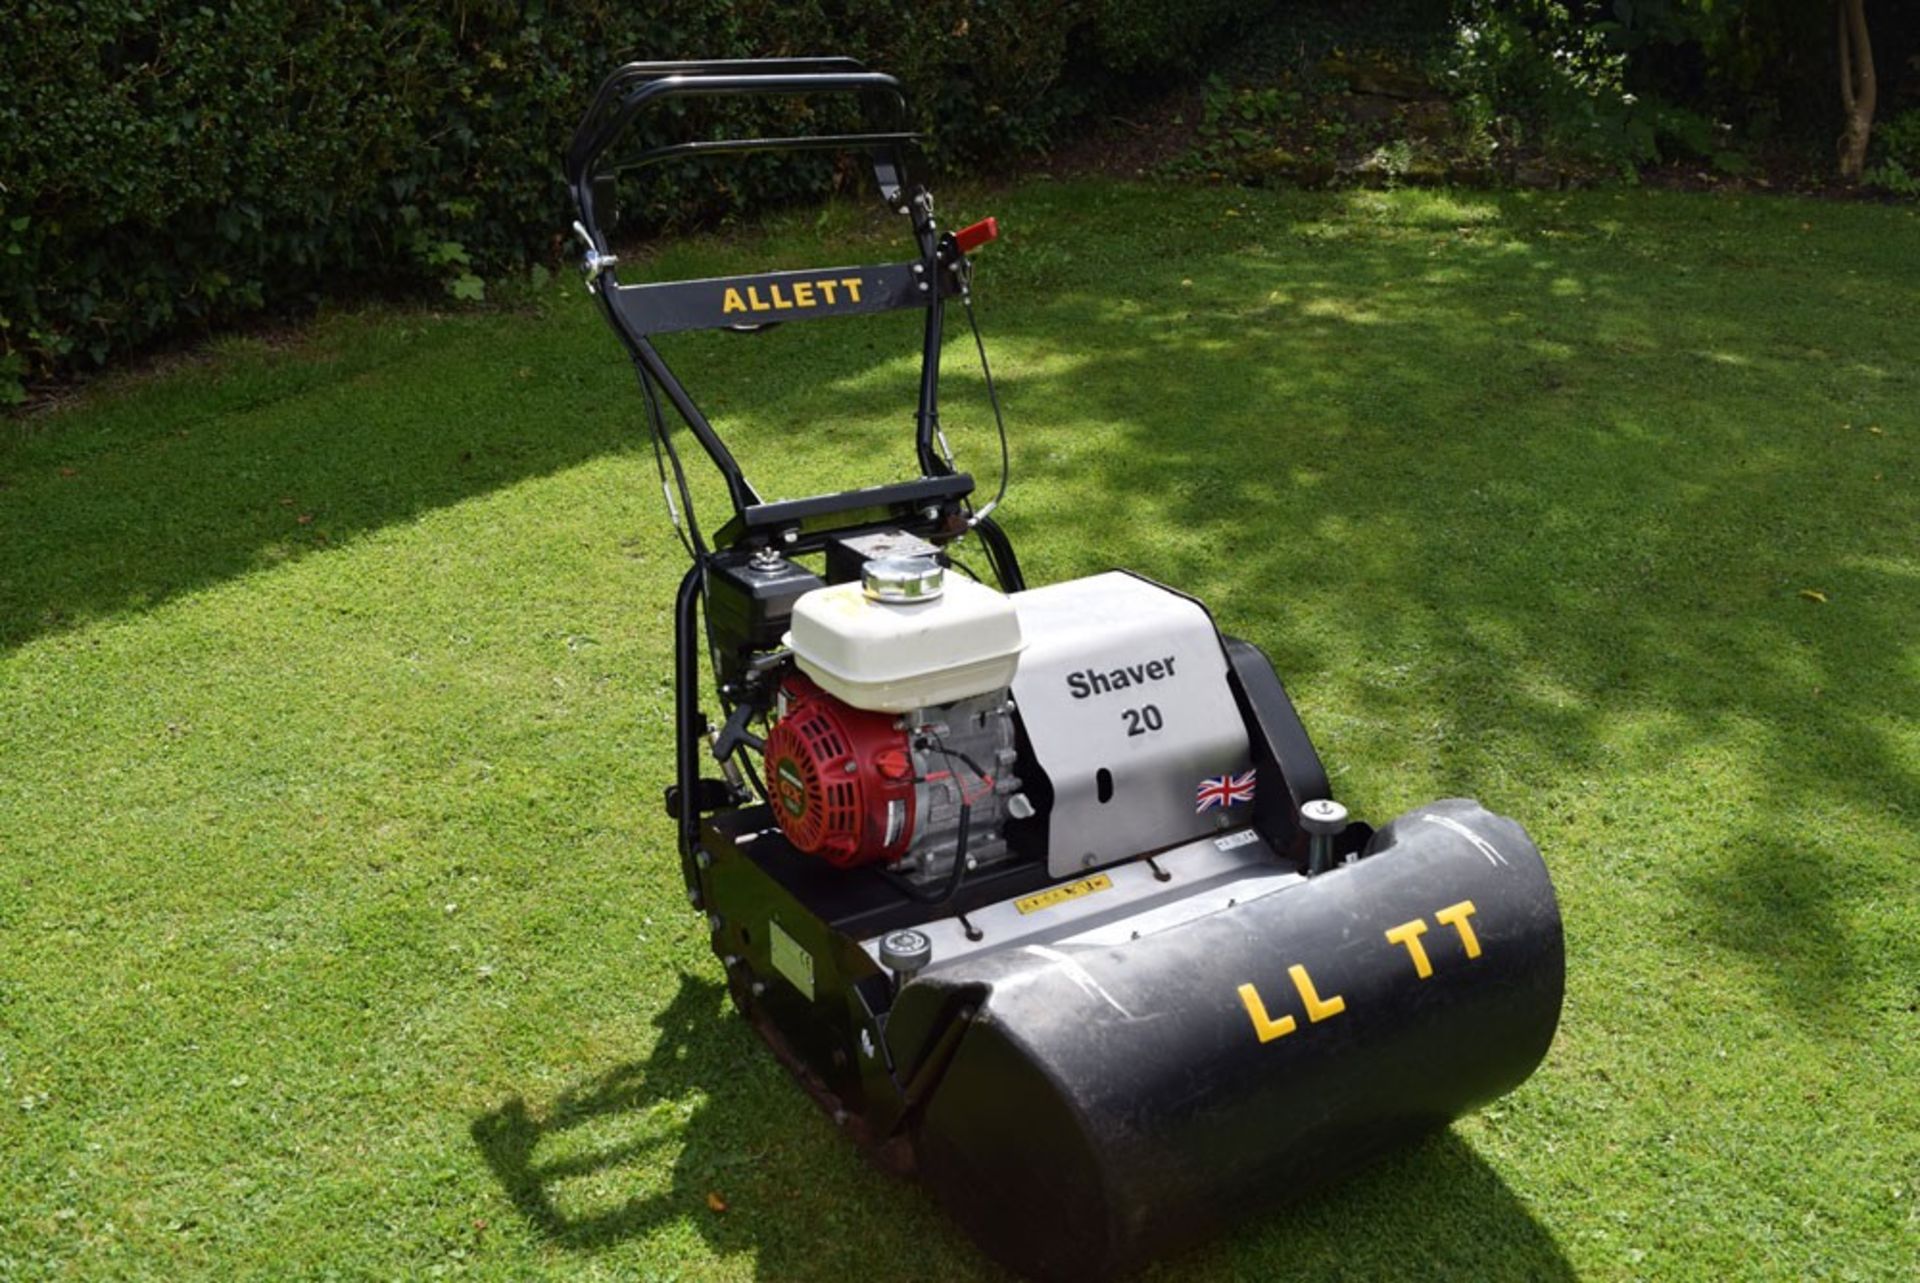 2012 Allett Shaver 20, 10 Blade Cylinder Mower With Grass Box - Image 8 of 8